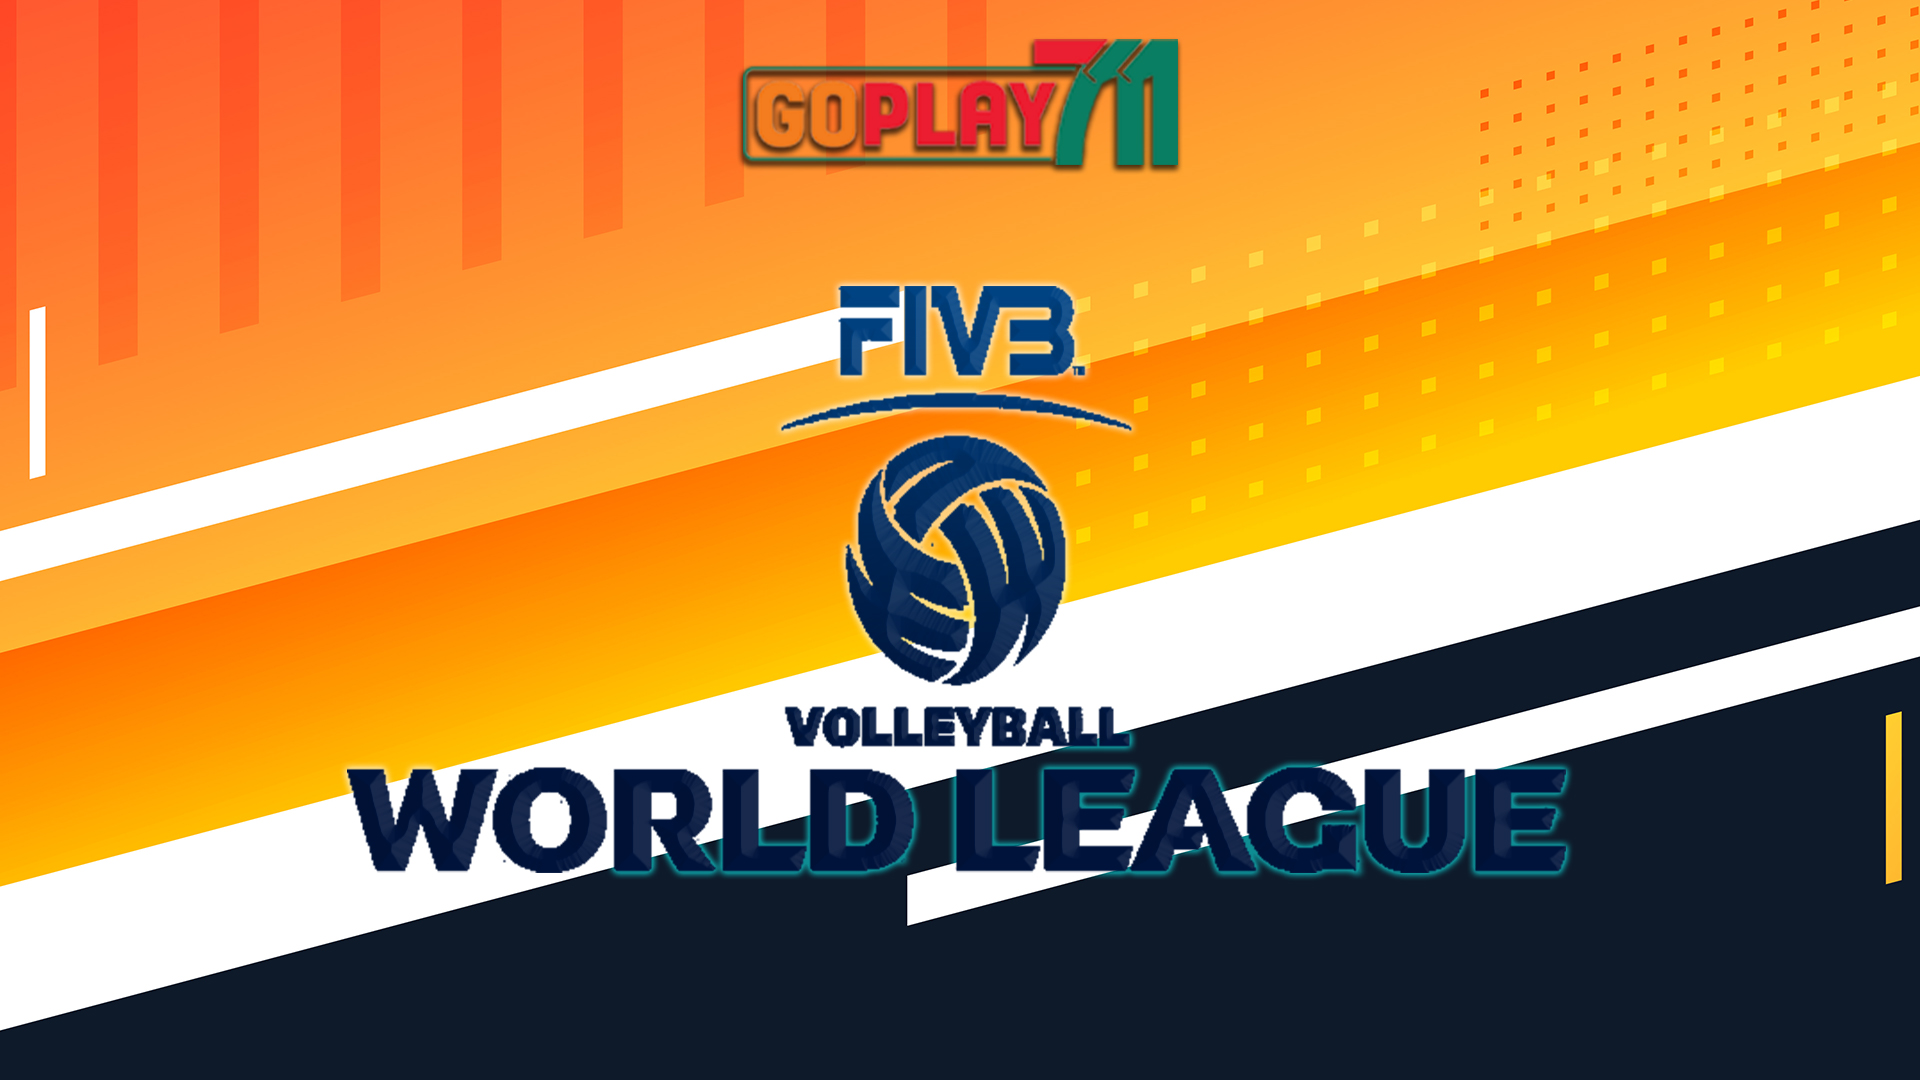 FIVB Volleyball World League